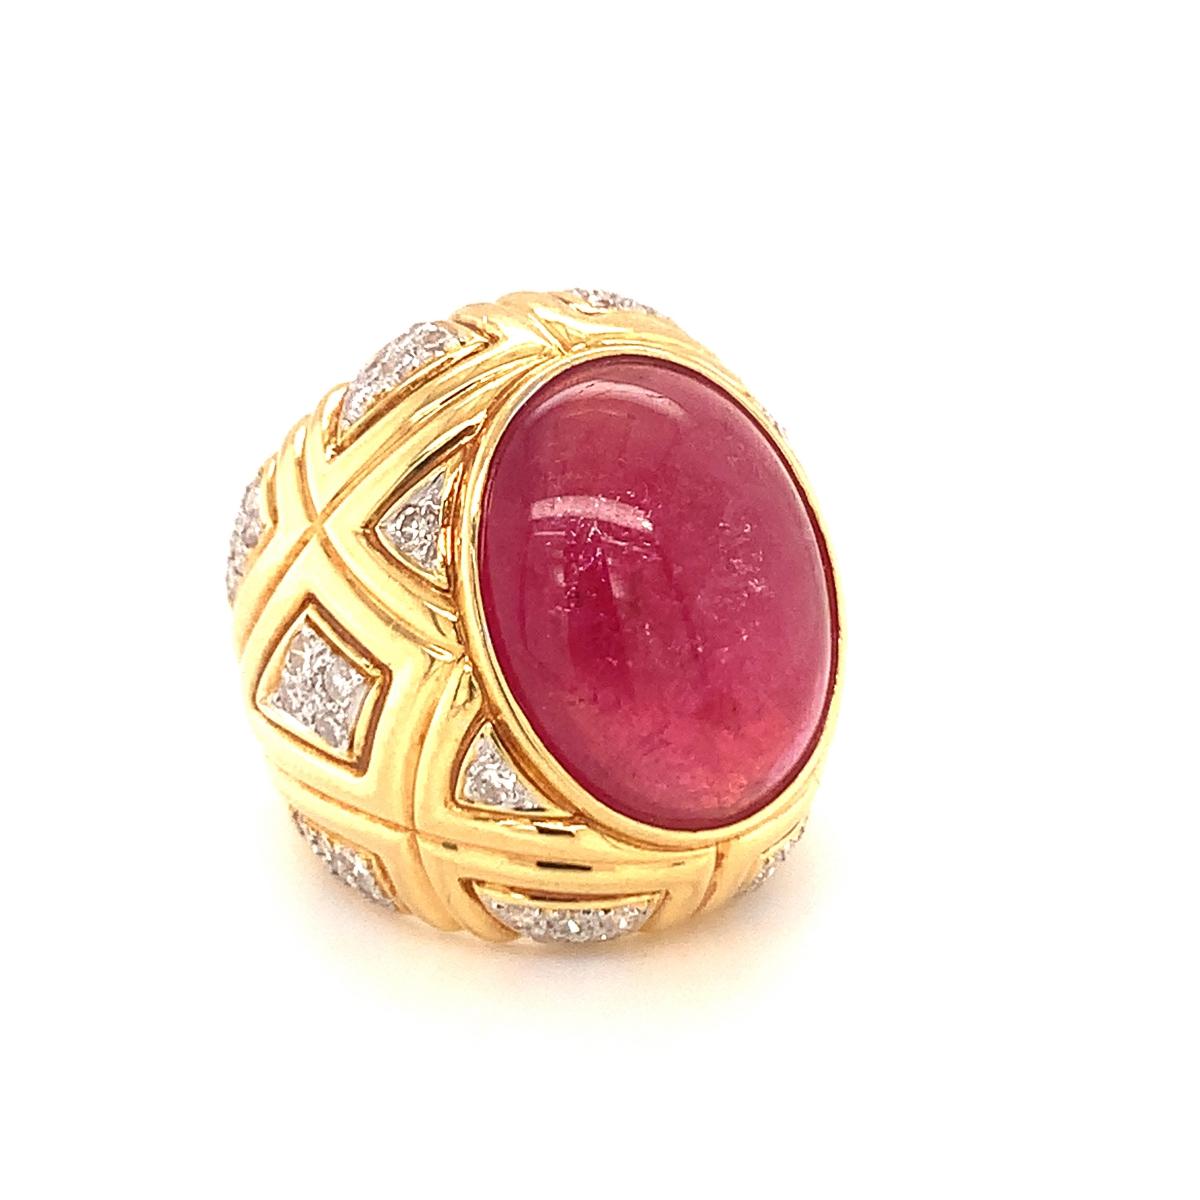 Pink Tourmaline and Diamond 18k Yellow Gold Dome Ring, circa 1970s For Sale 1